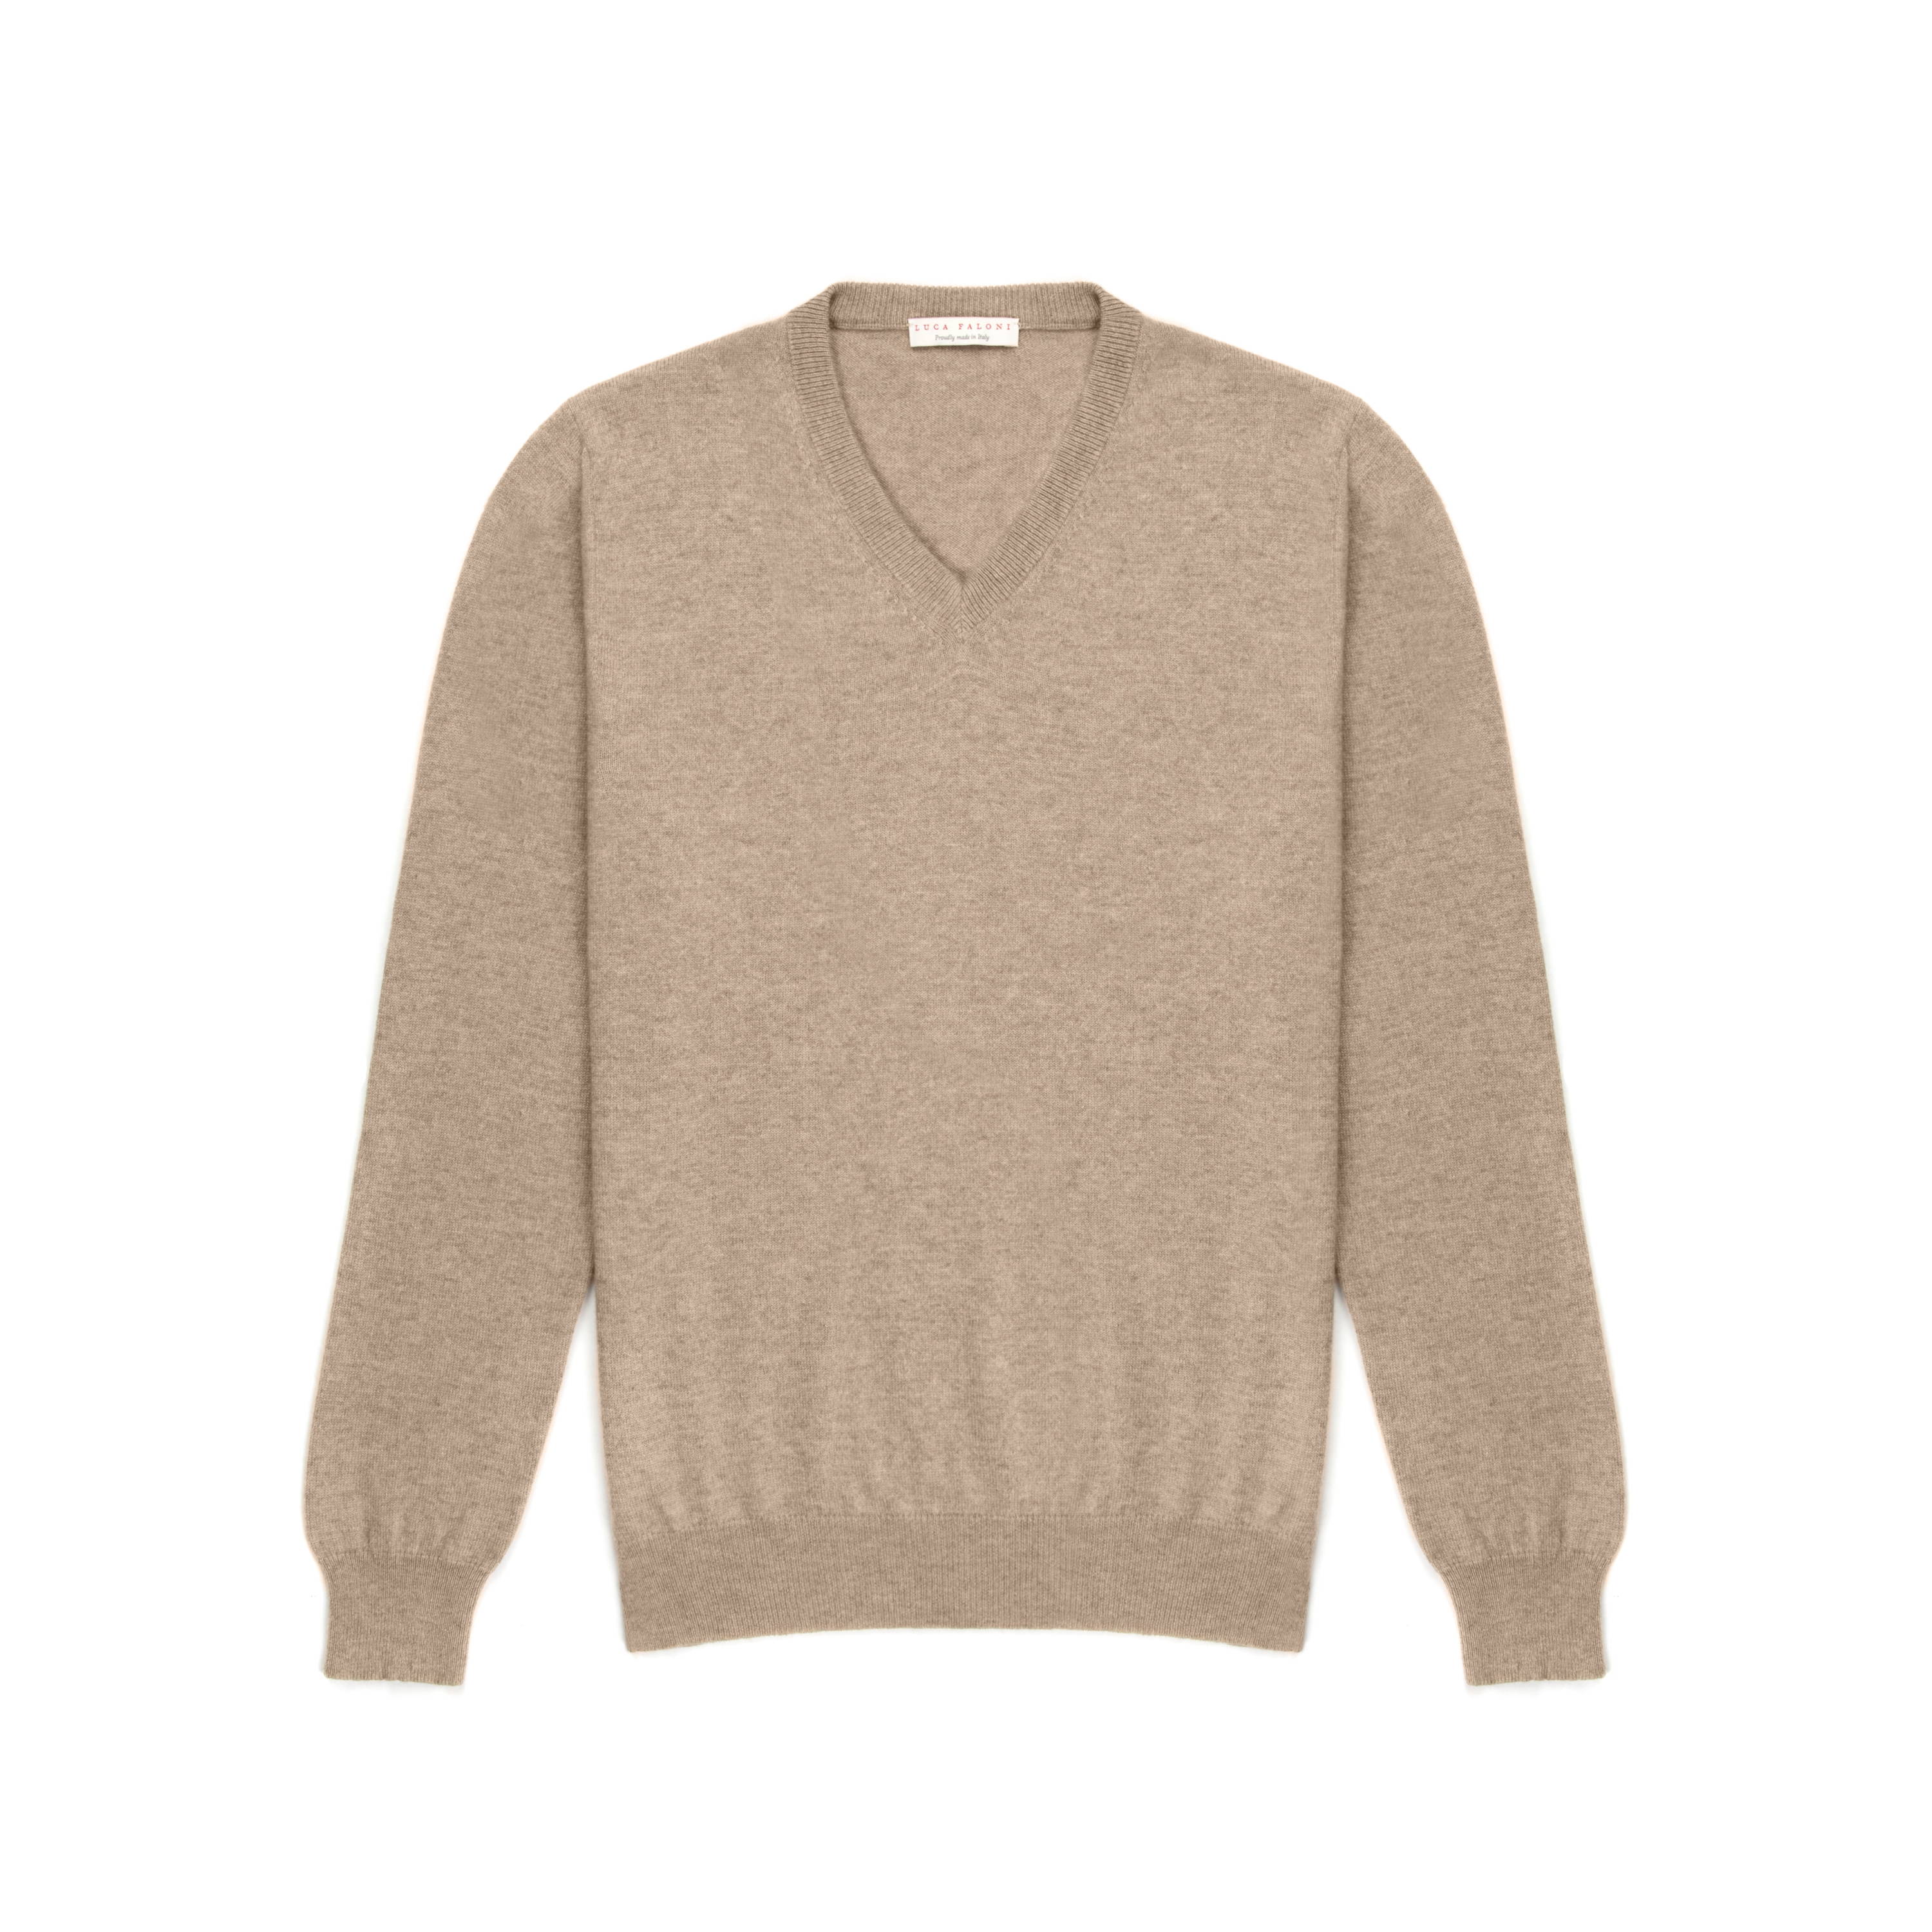 Luca Faloni Camel Beige Pure Cashmere V Neck Made in Italy